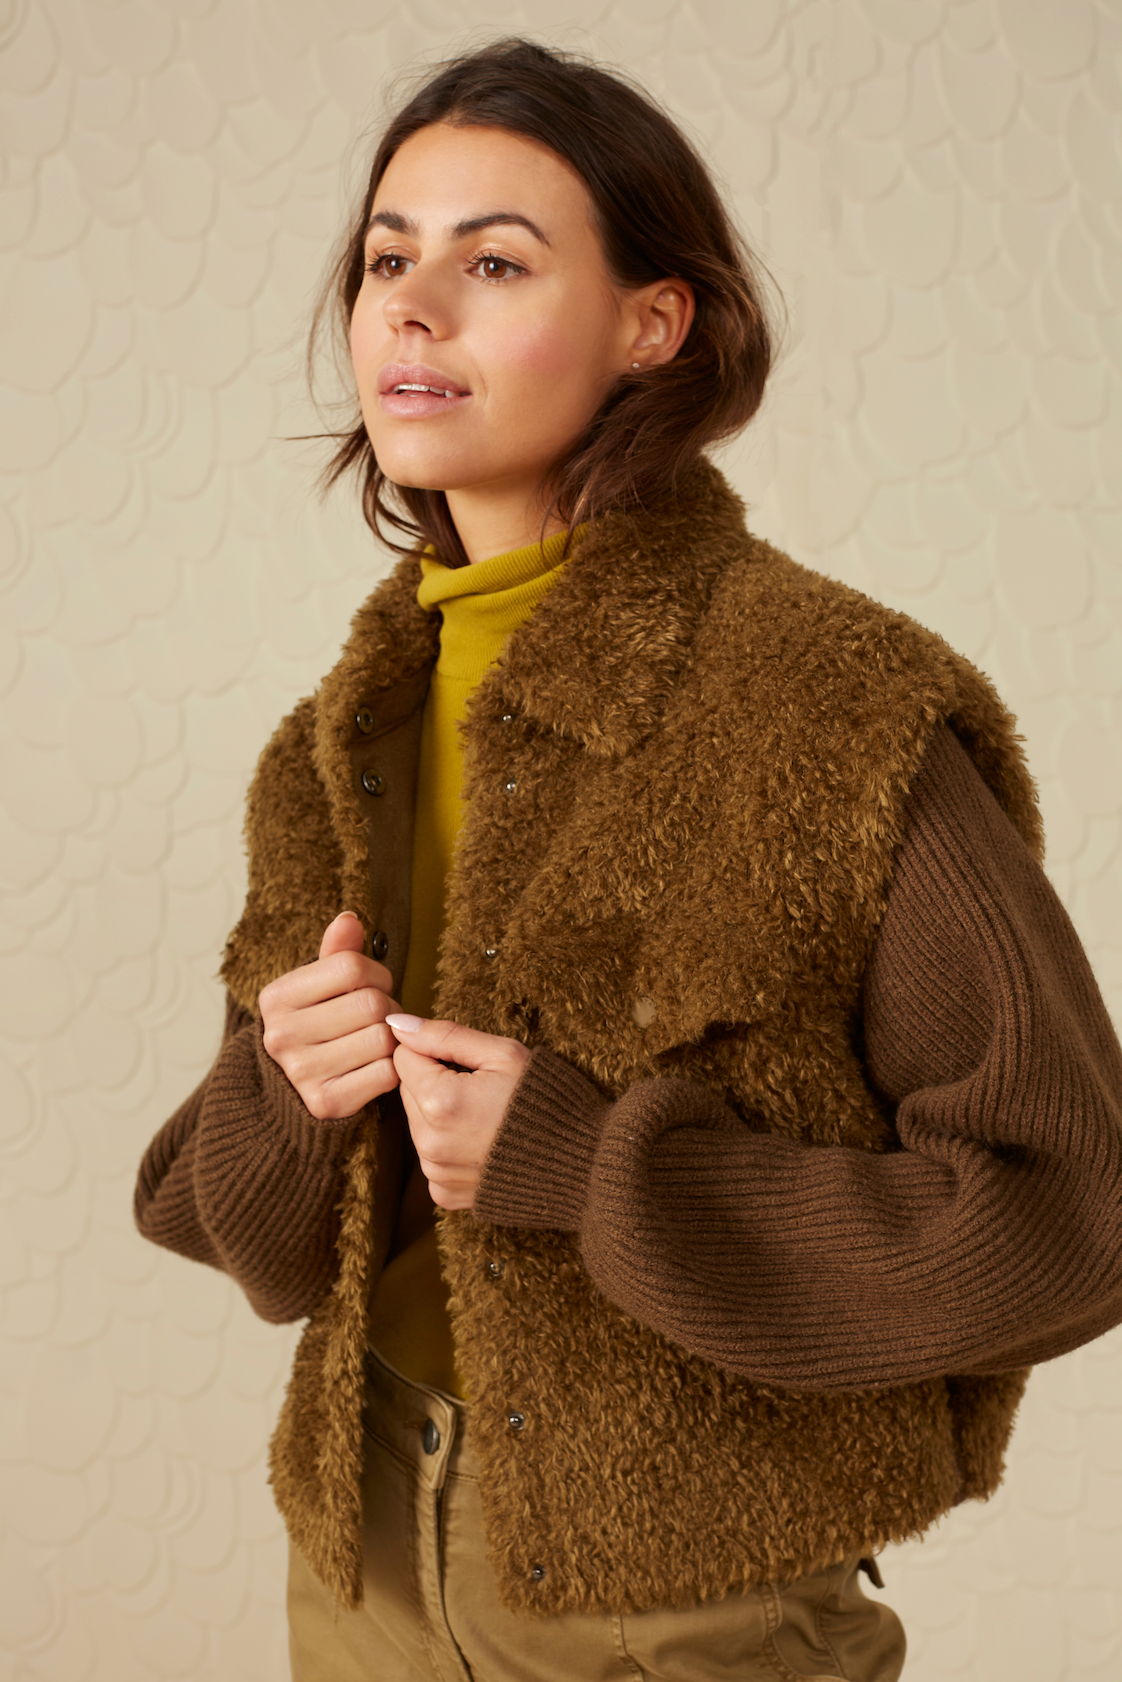 Short Teddy Jacket With Knitted Sleeves by Yaya